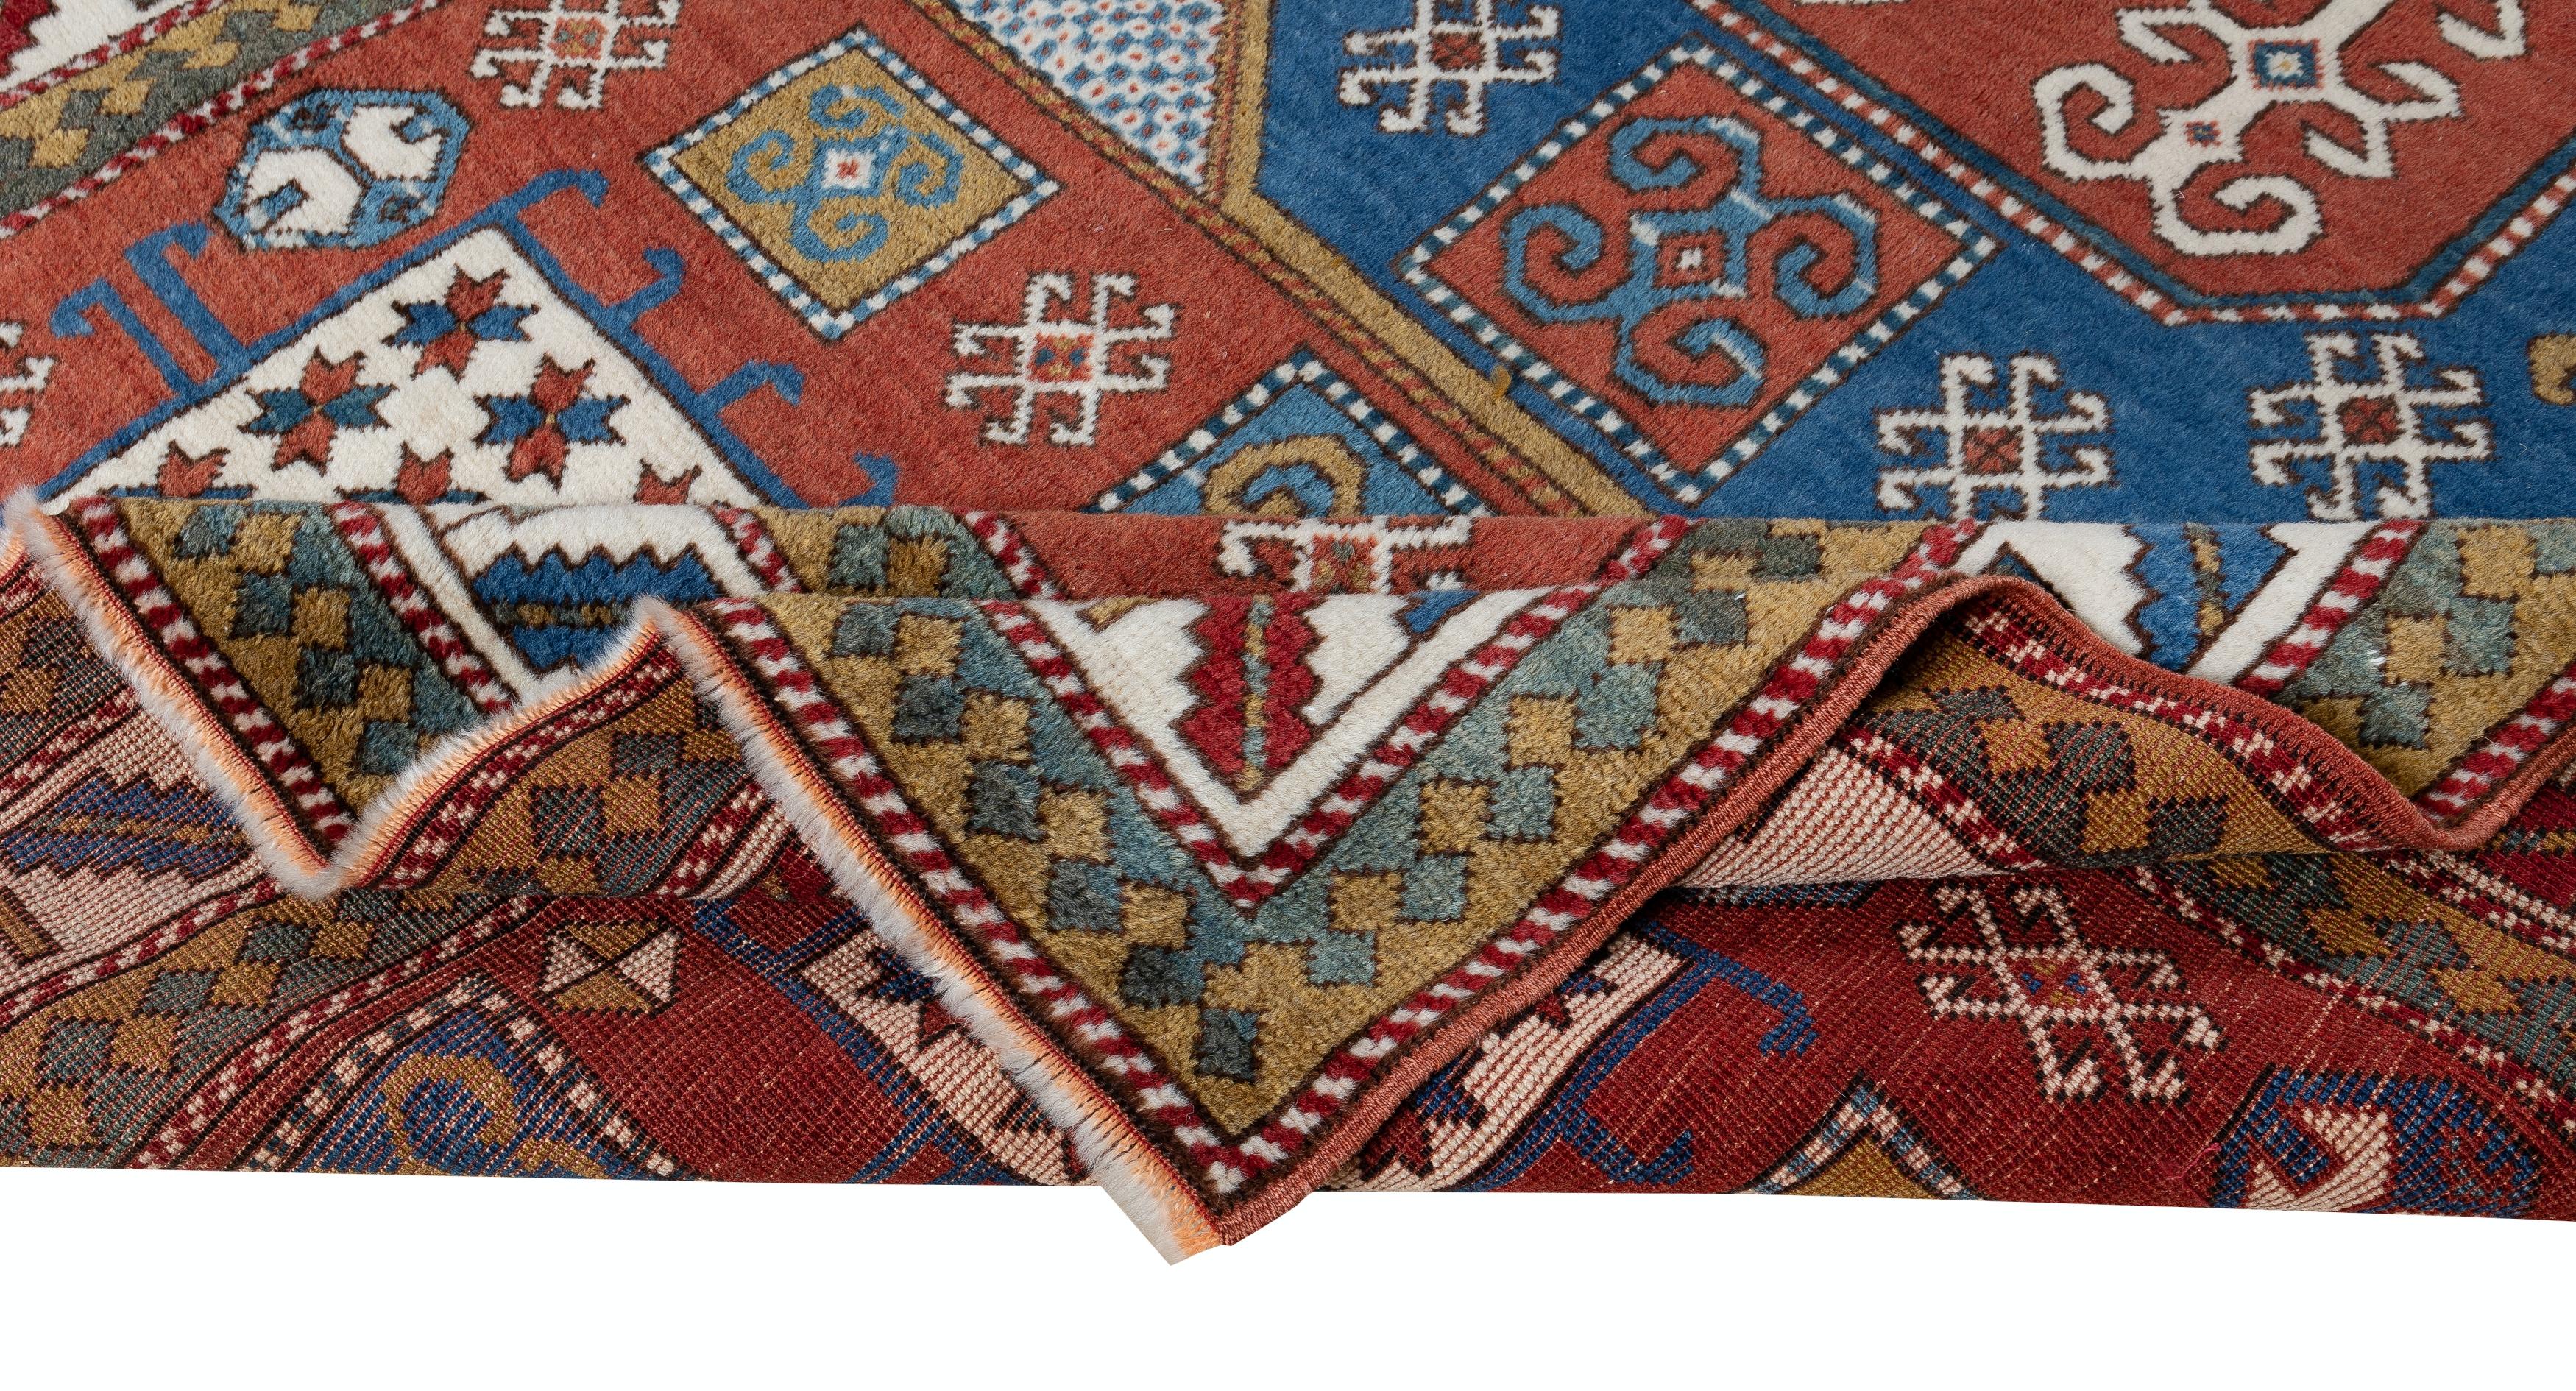 An authentic brand-new hand-knotted wool rug made in Turkey with a Caucasian Kazak design featuring bold geometric angular forms in contrasting scales, each containing a symbolic motif such as stars, ram's horns, wheels of fortune, eyes and trees of